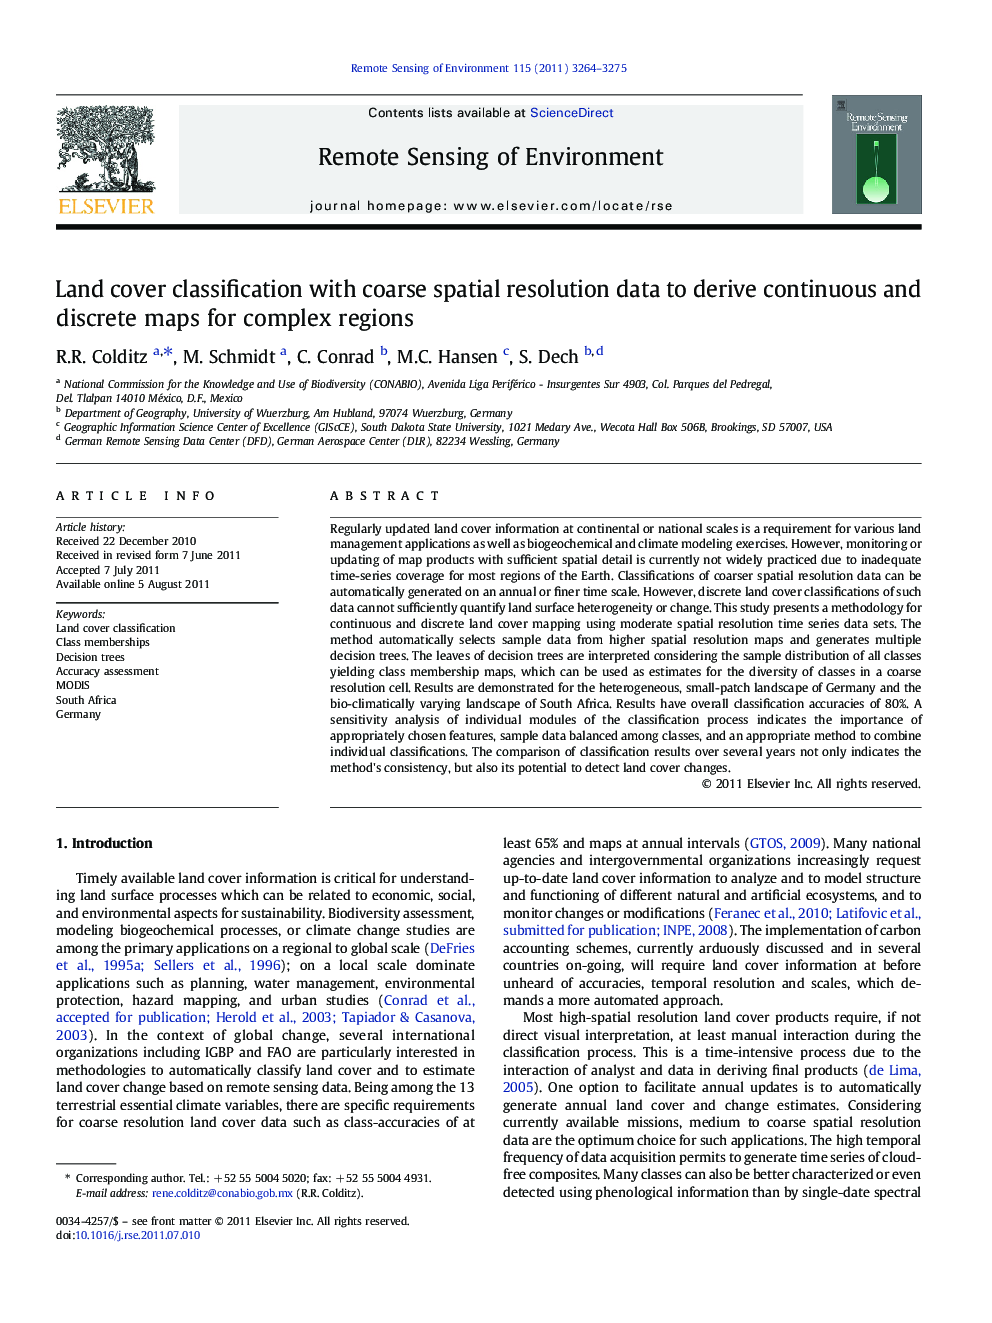 Land cover classification with coarse spatial resolution data to derive continuous and discrete maps for complex regions